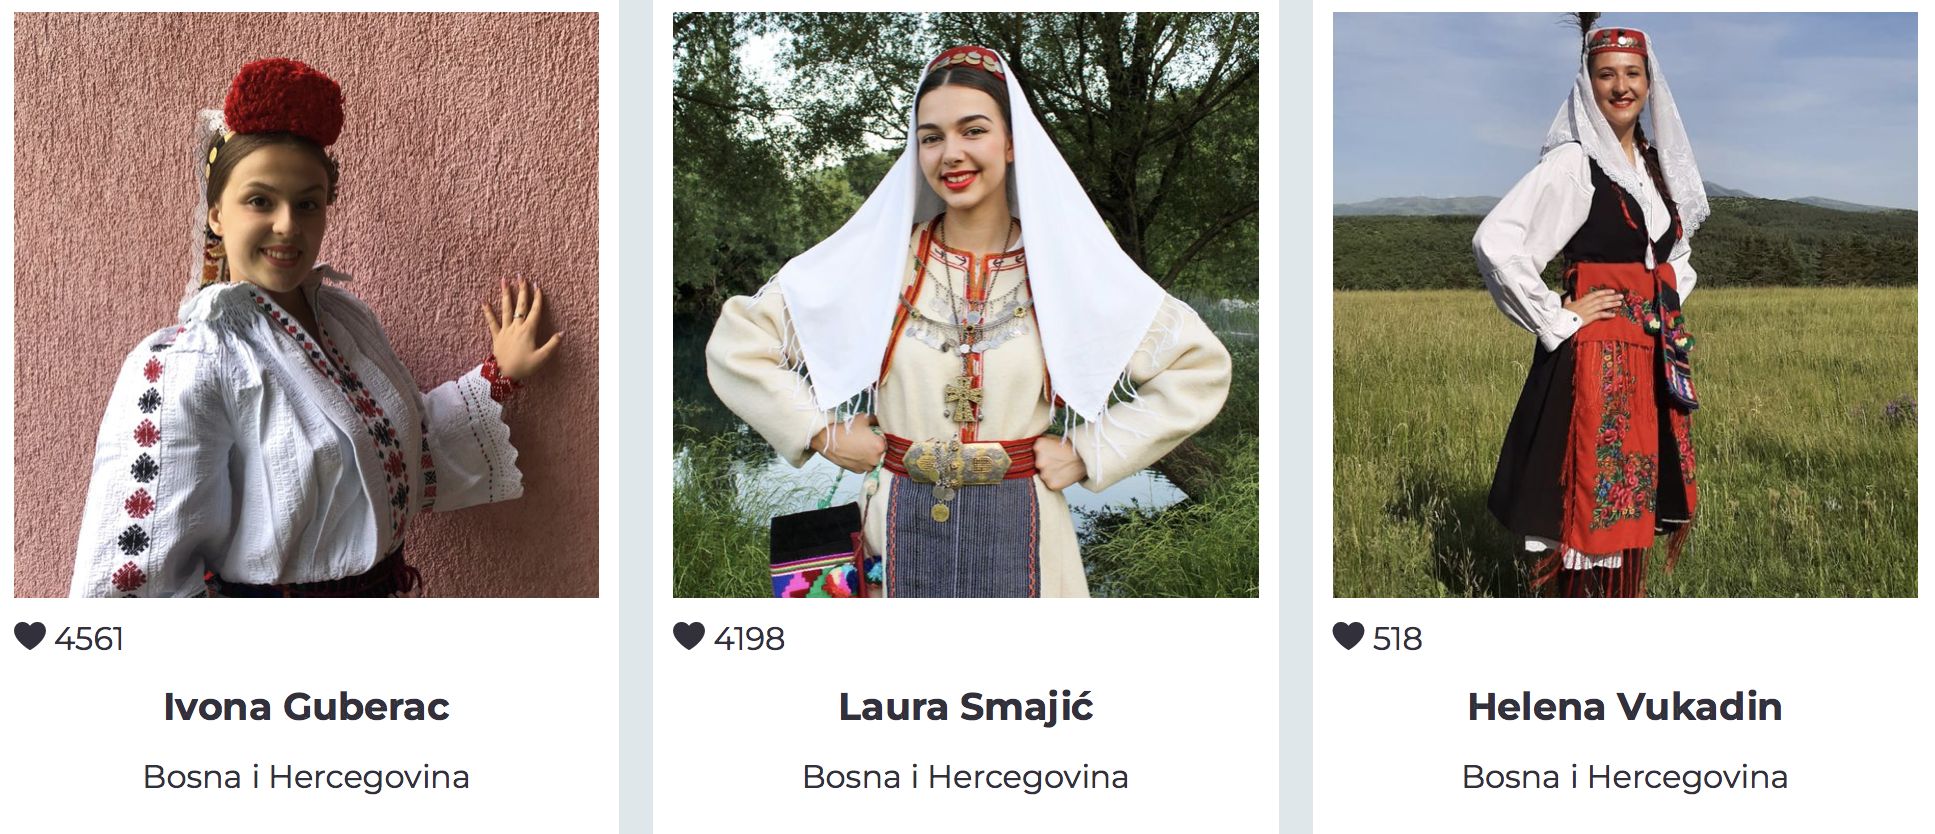 Most beautiful Croatian in folk costume abroad to be selected - the candidates 